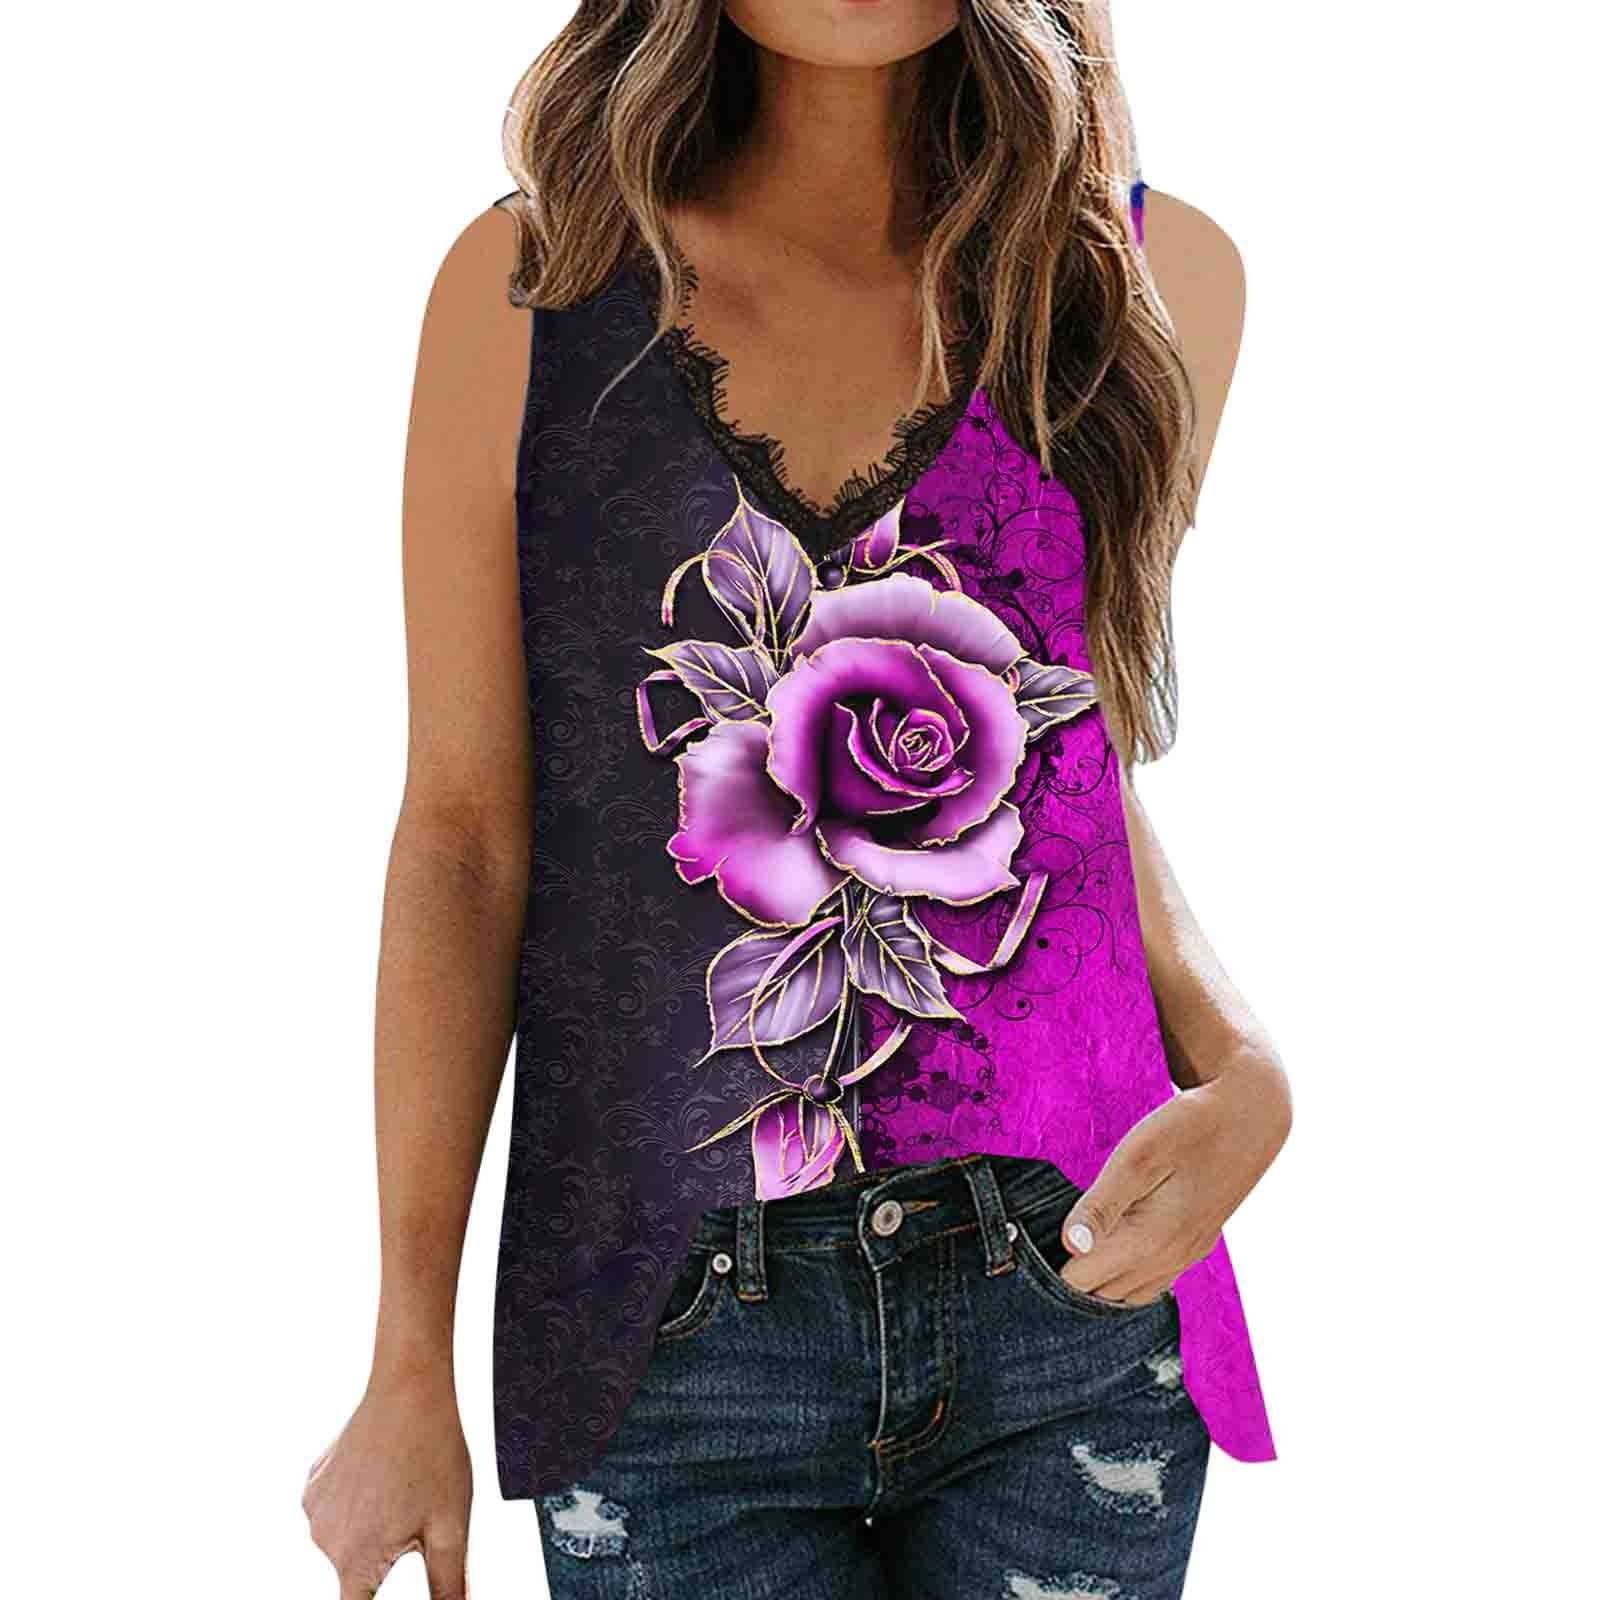 NECHOLOGY Womens Tank Top Black Fitted Muscle Women Women Summer Sleeveless  Floral Printed V Neck Lace Tank Tops Casual Tops Purple X-Large 